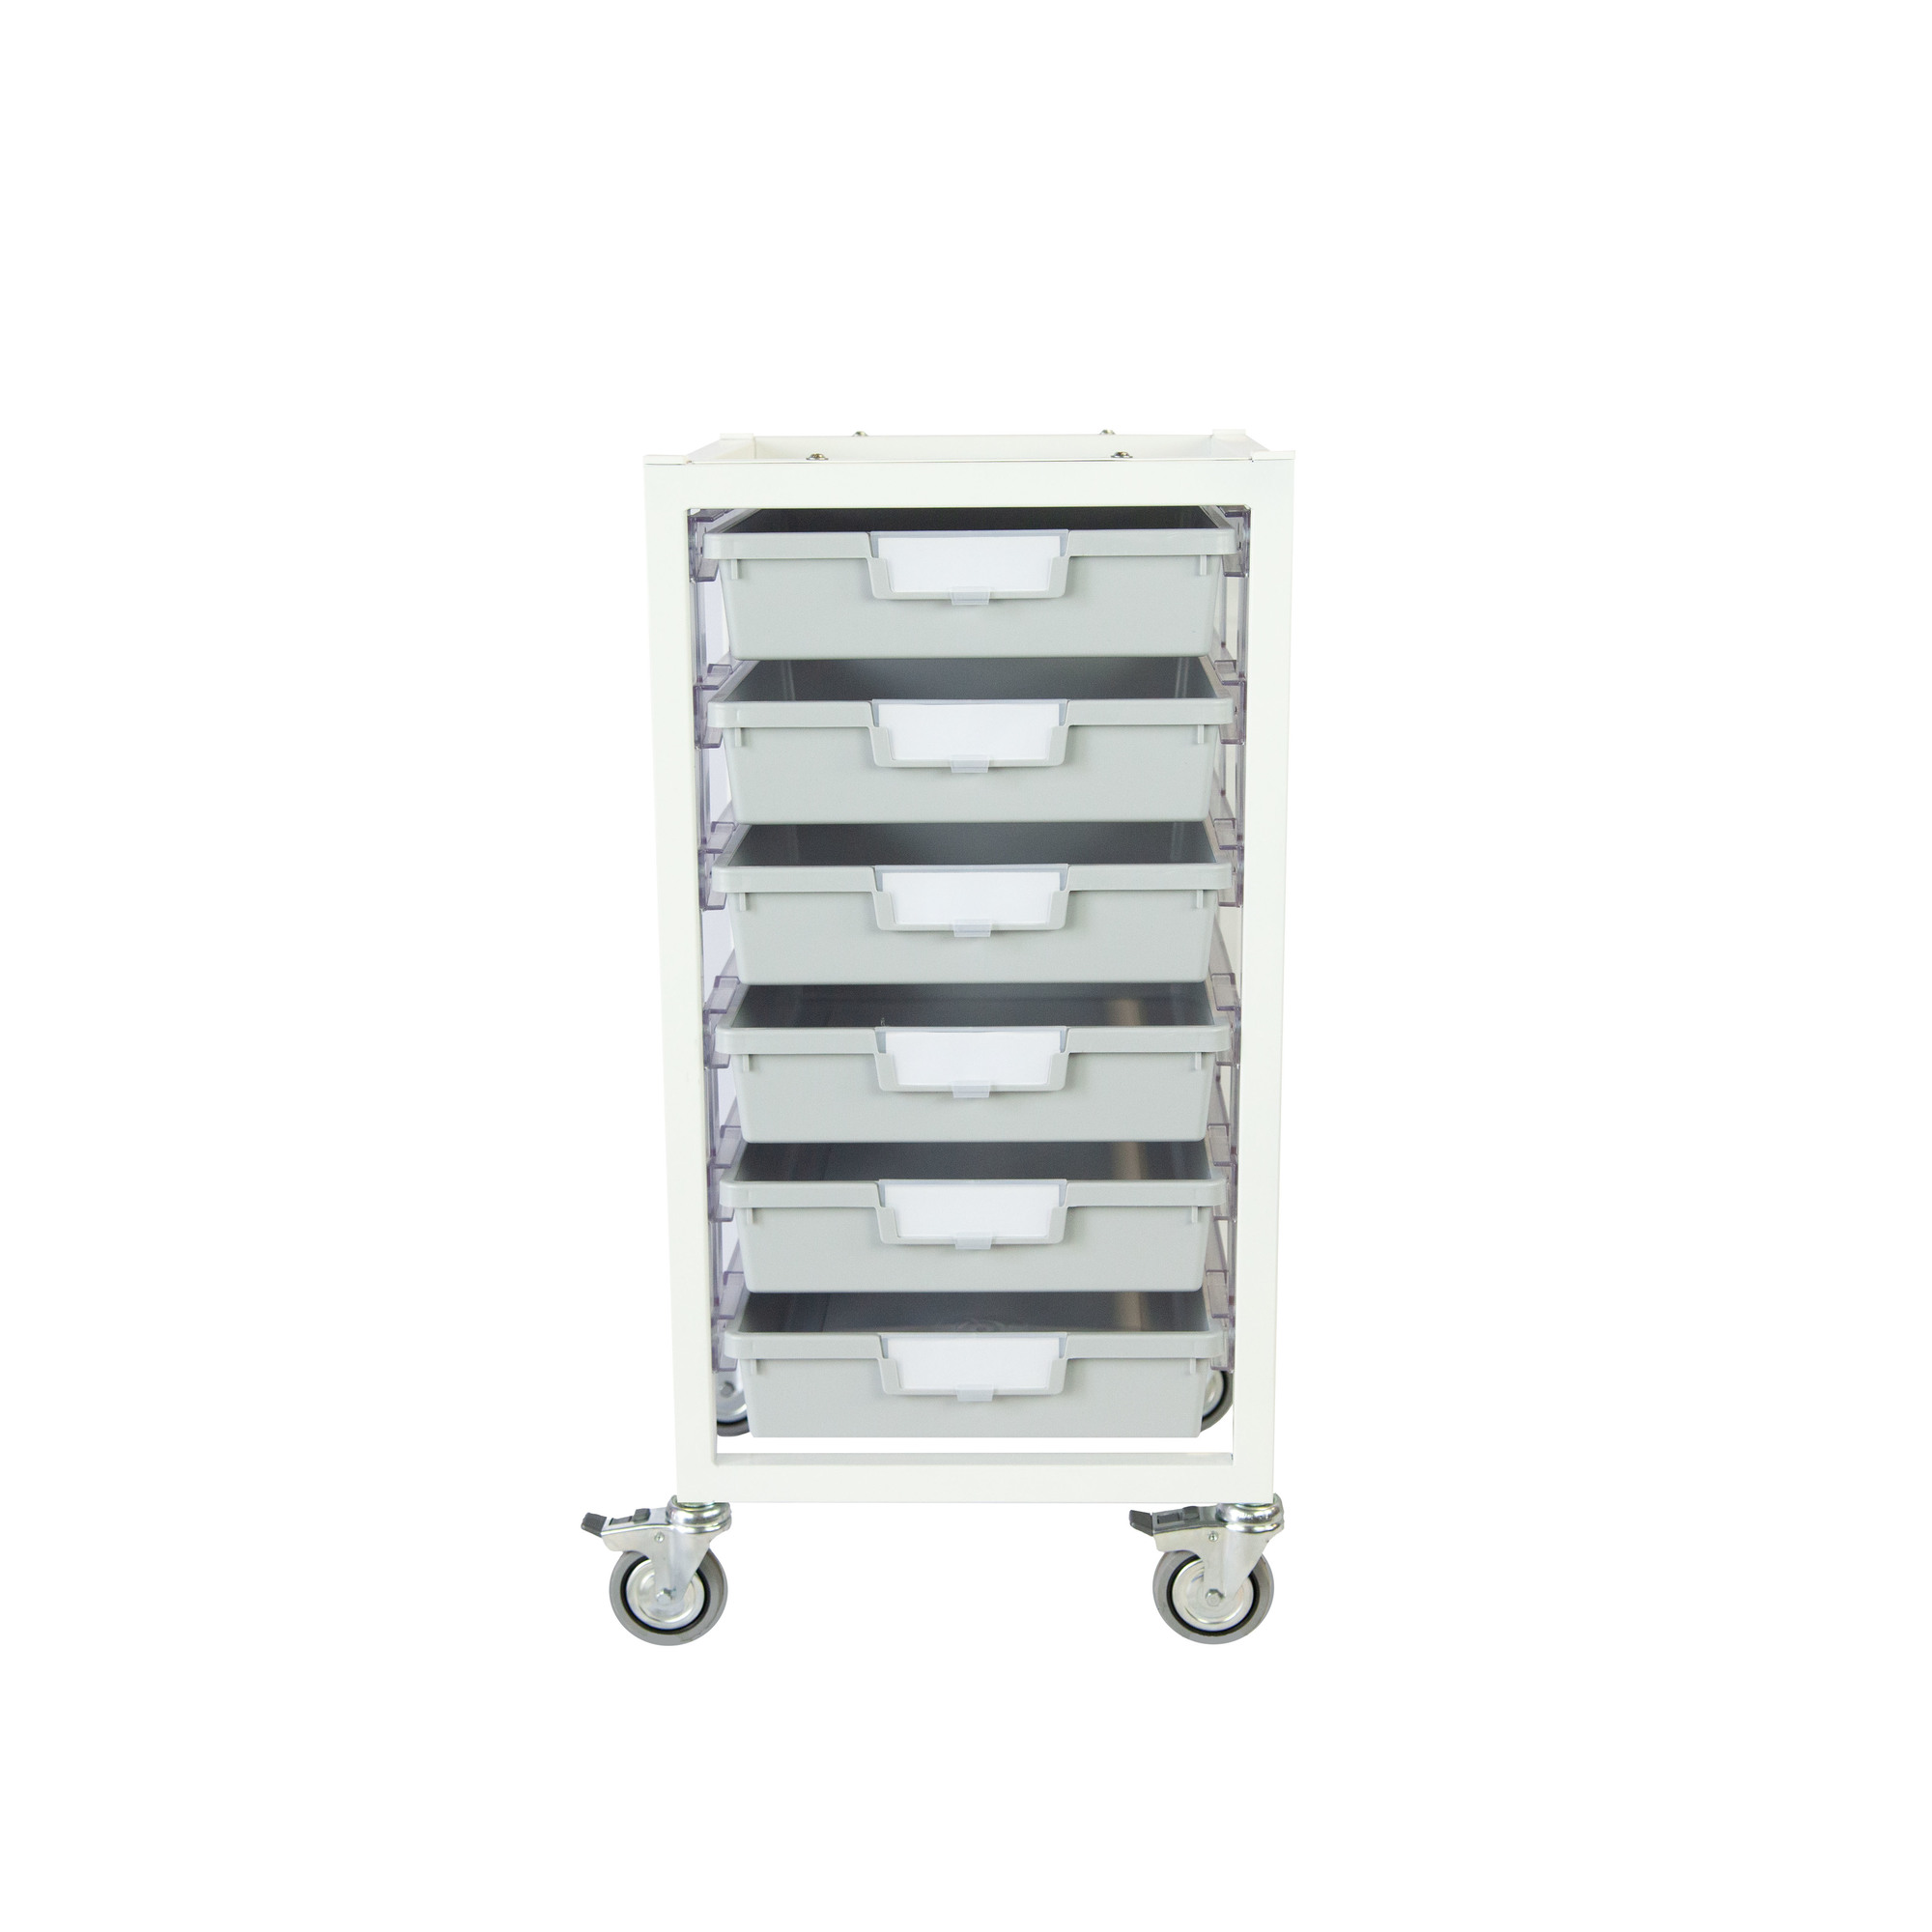 Certwood, Nimble Cart Slim-White with 6 Gray Trays, Included (qty.) 1, Material Steel, Height 15.75 in, Model CE2100WH-6SLG